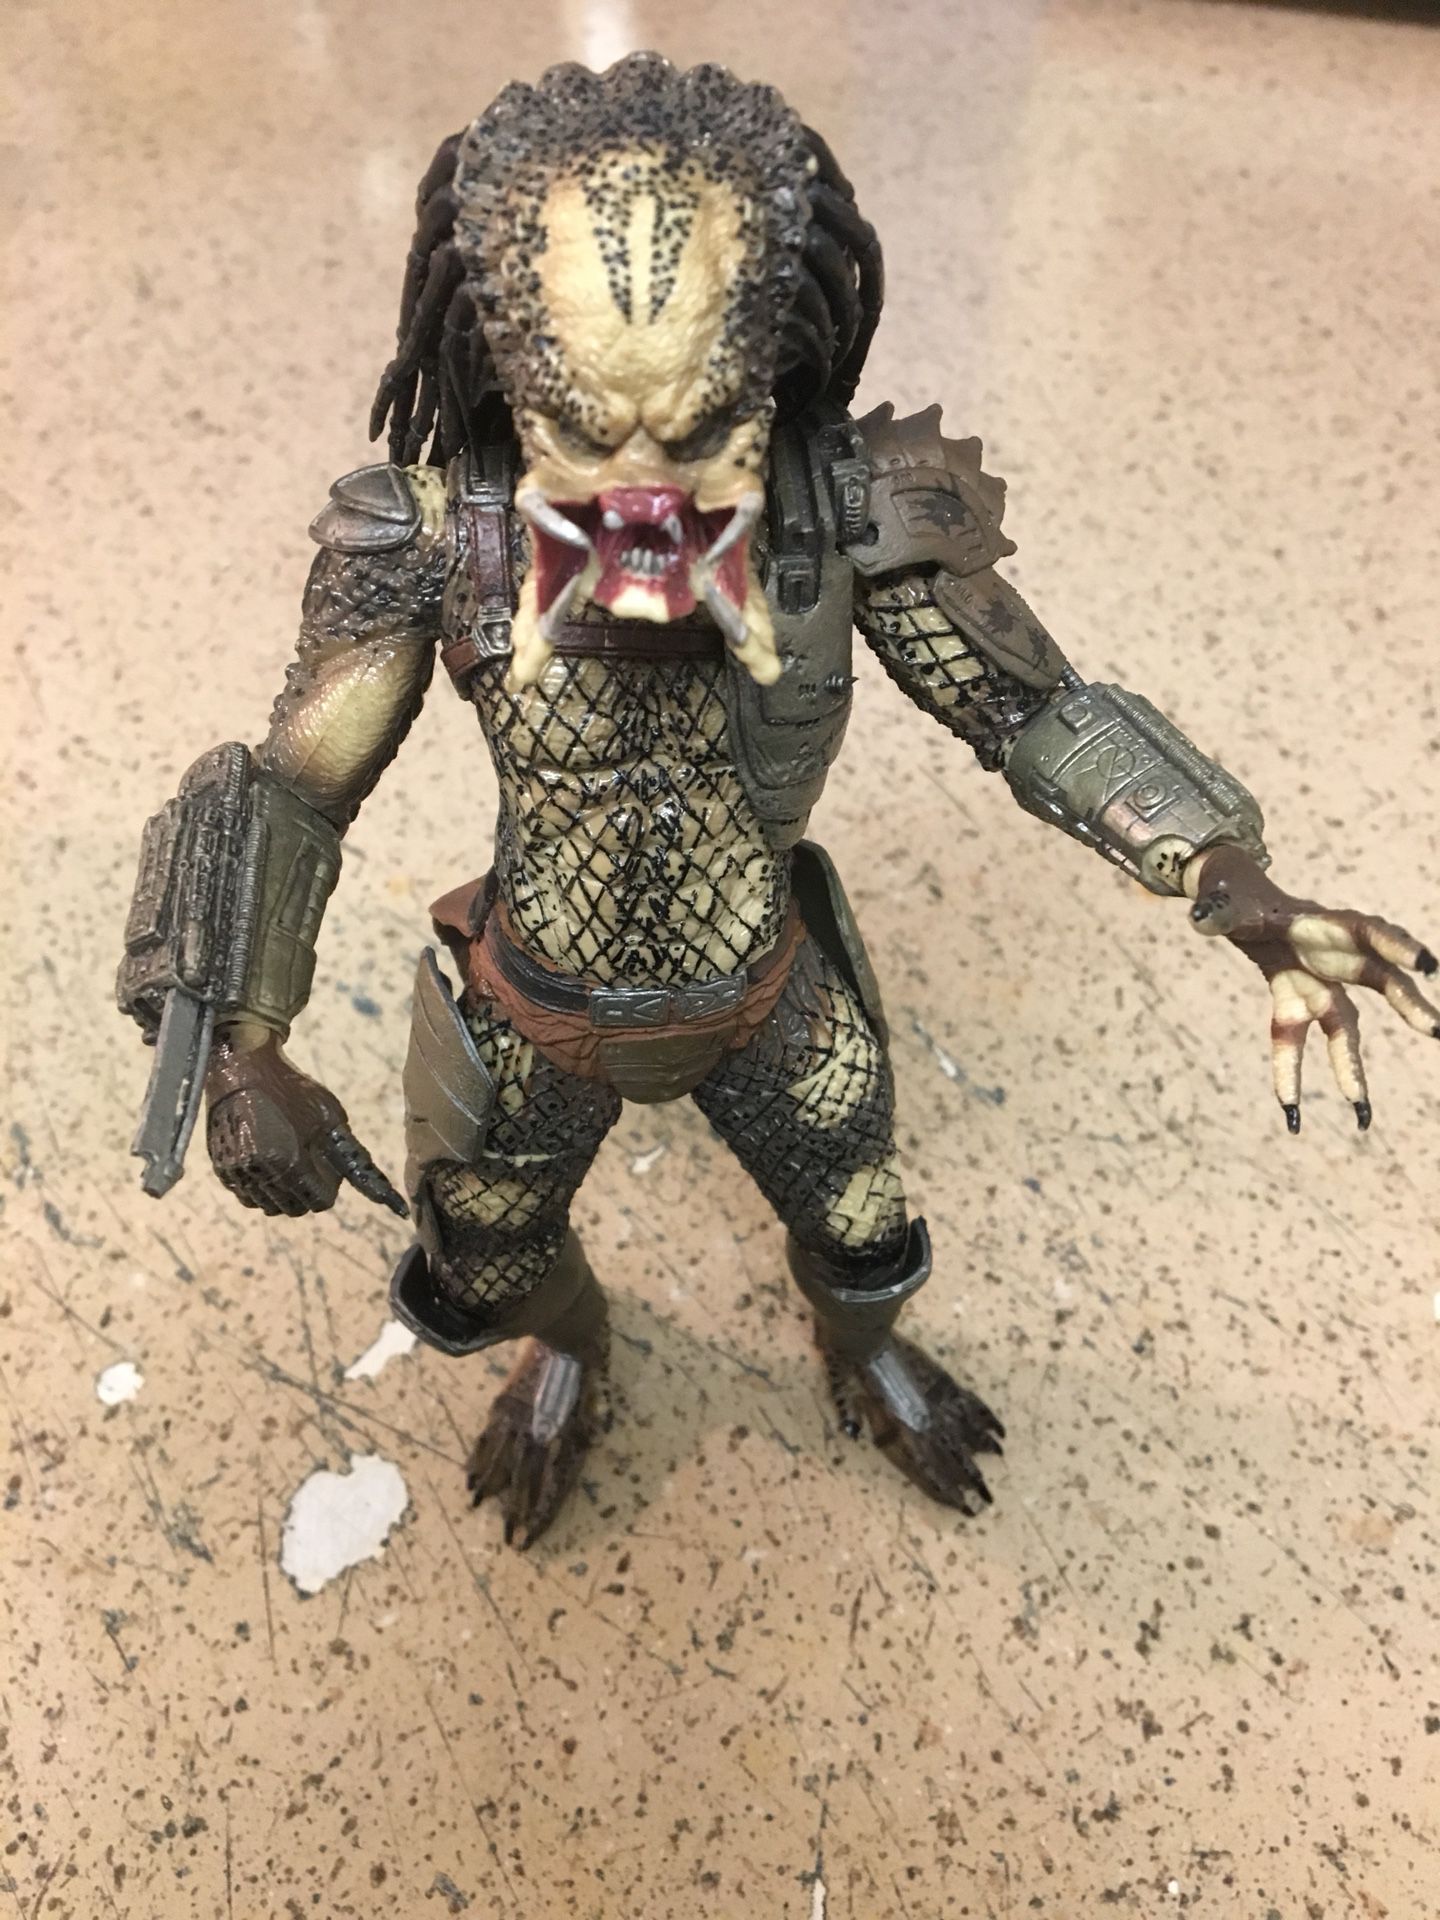 NECA AVP Collectible Toys ( One missing pieces )